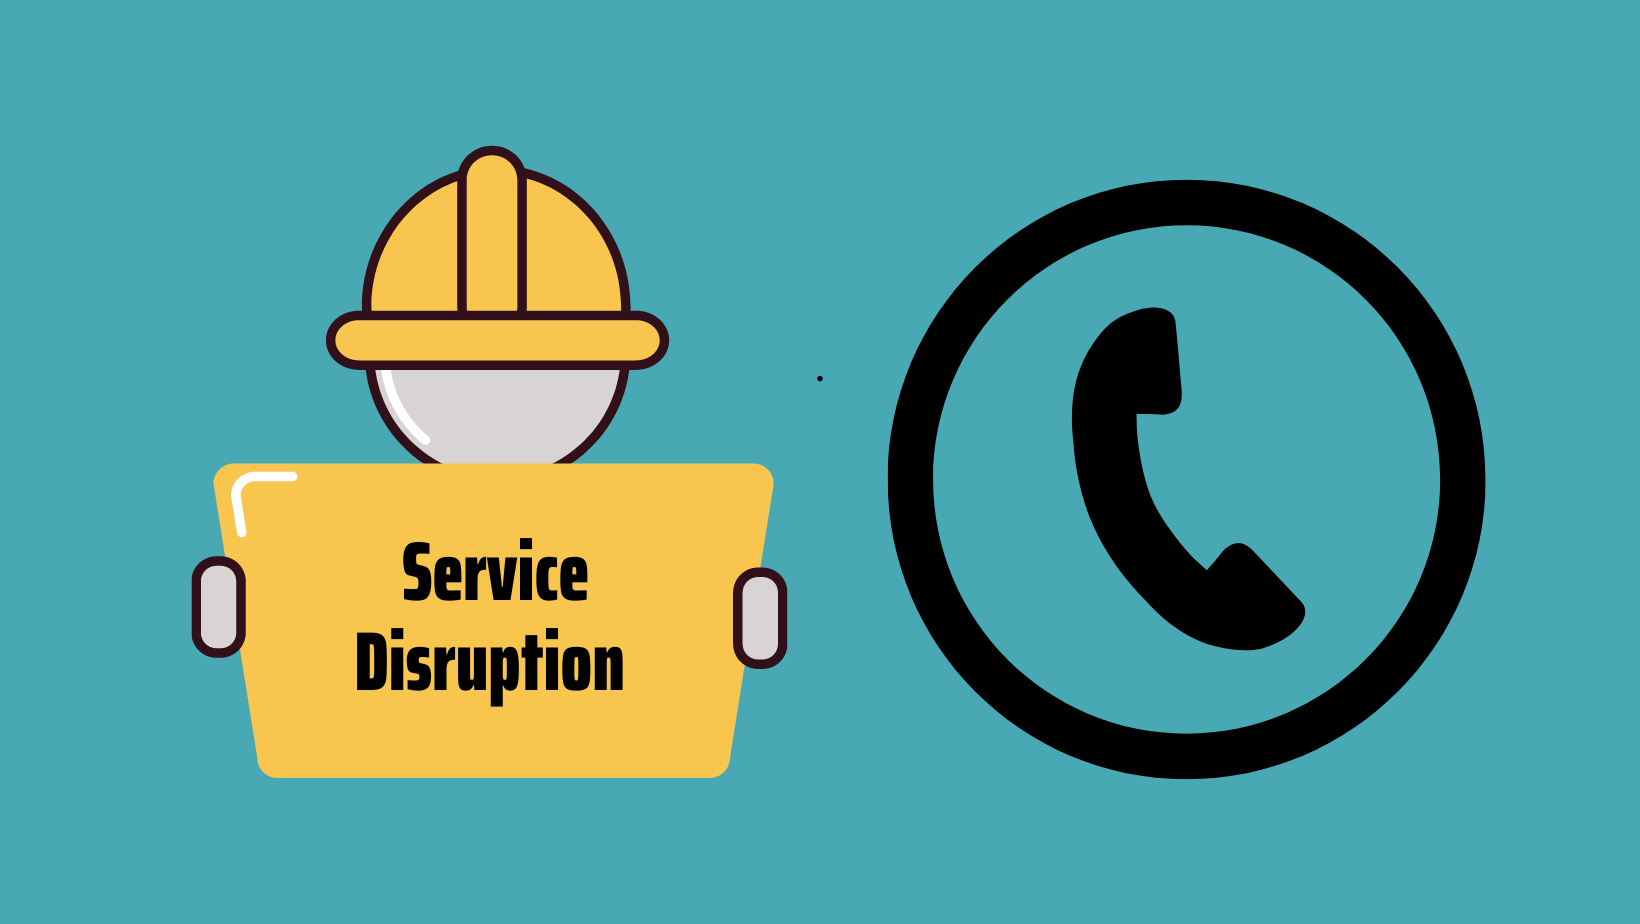 Construction worker holding a service disruption sign